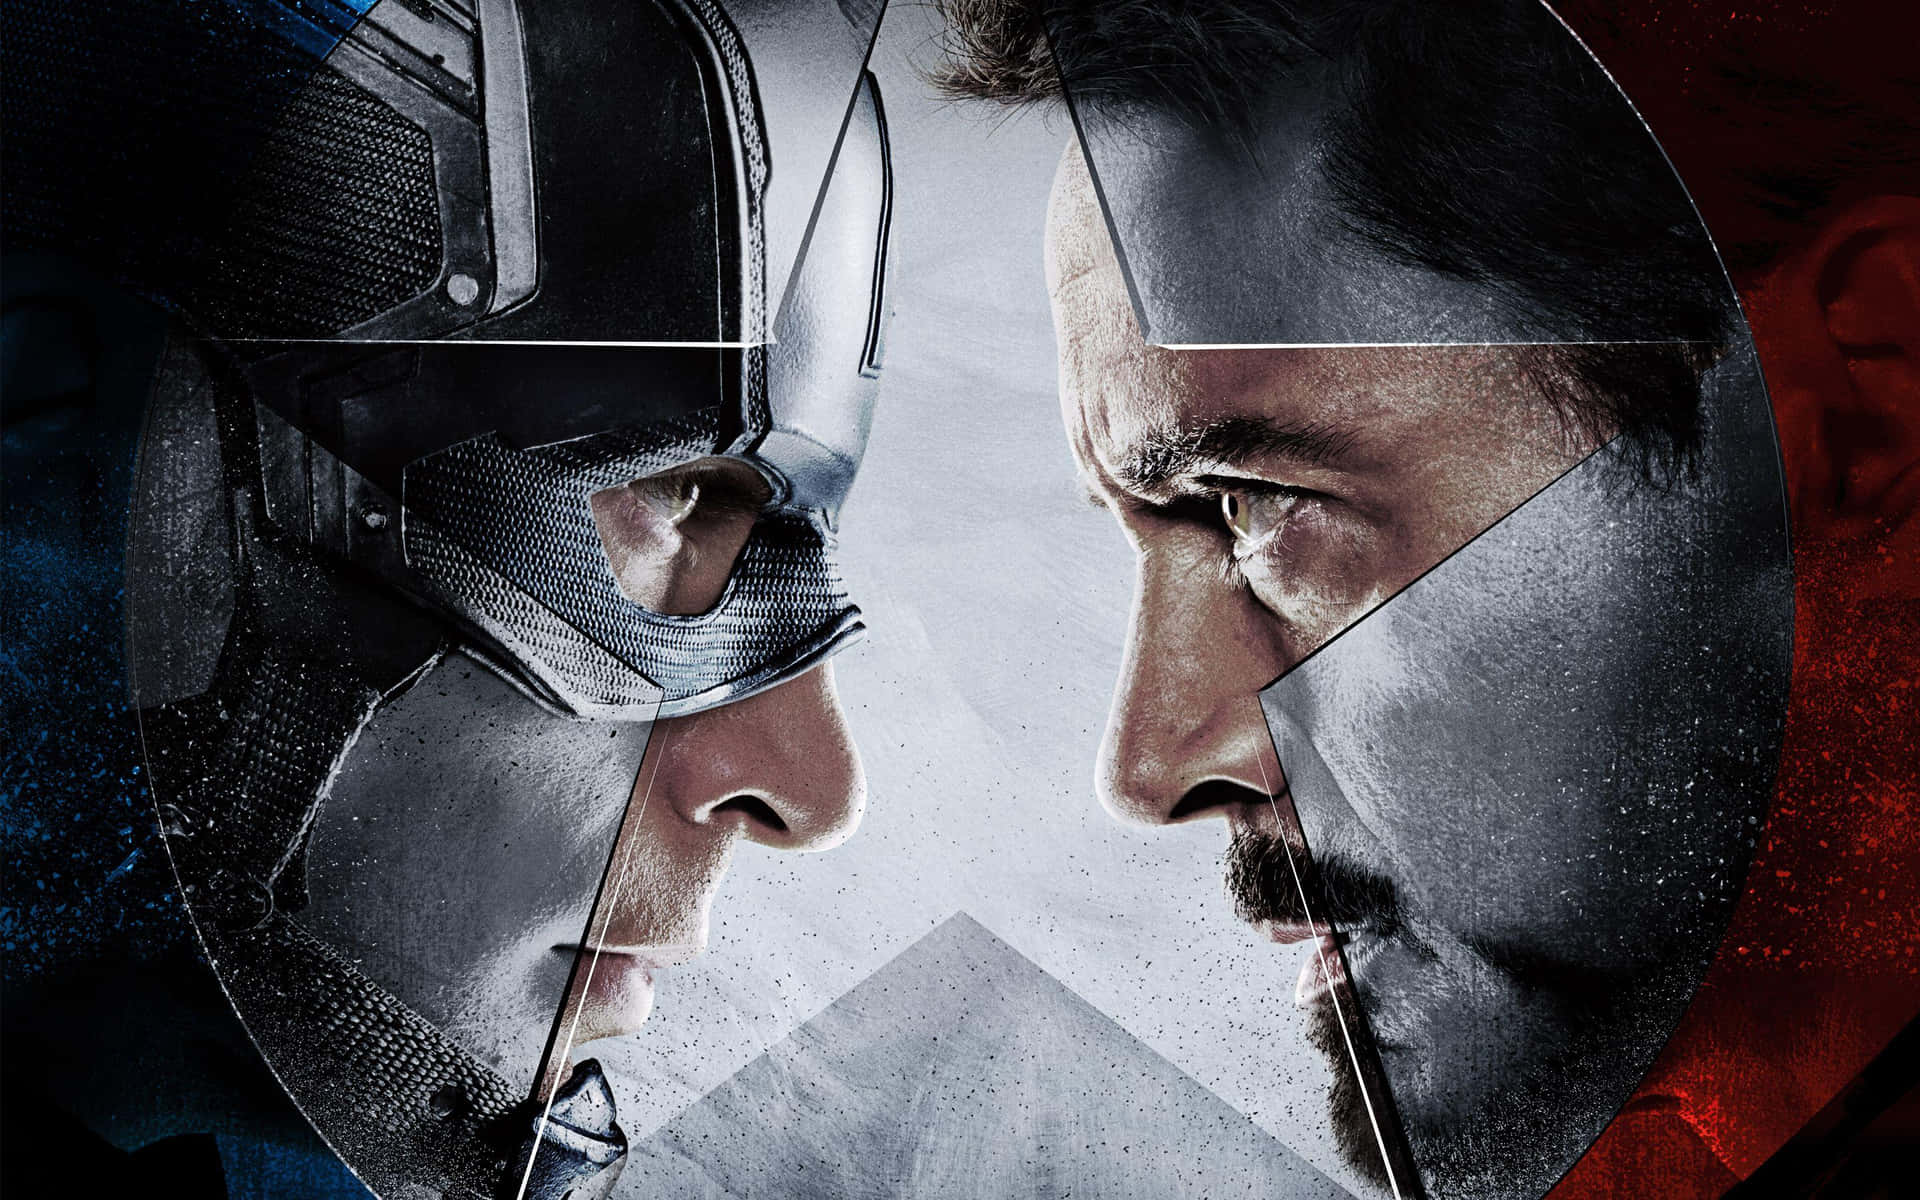 The Showdown Between Iron Man and Captain America" Wallpaper